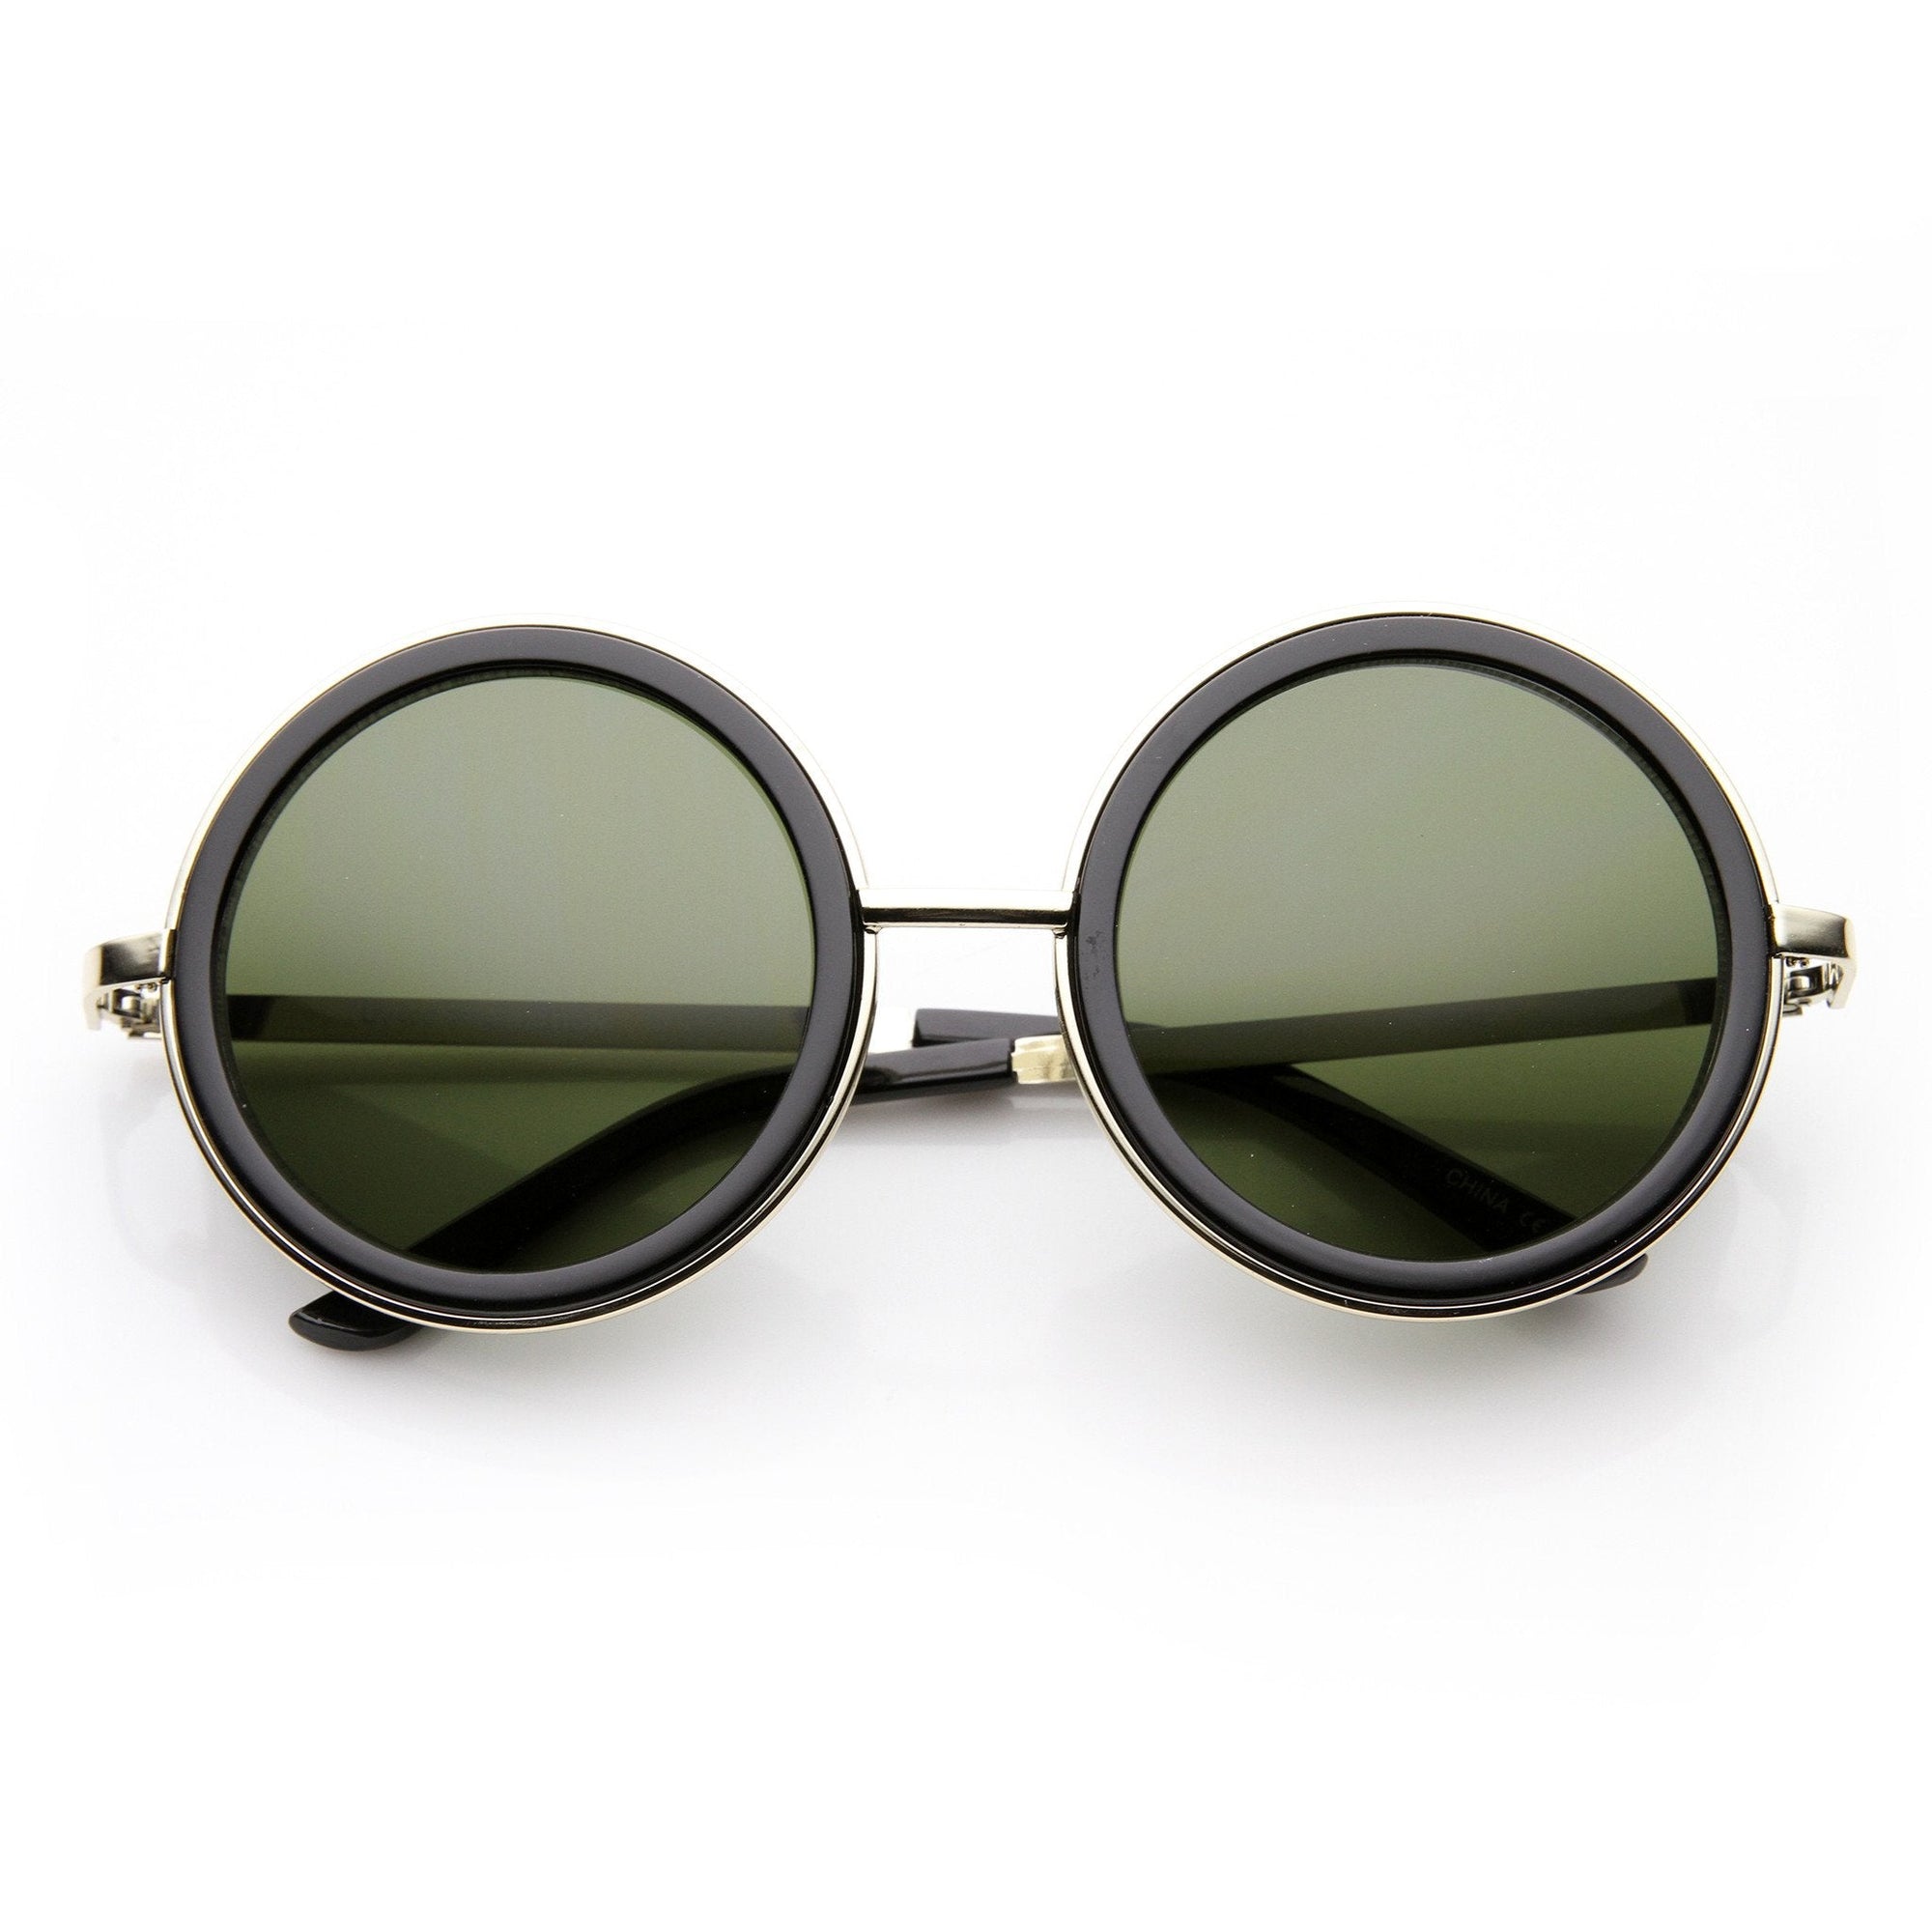 Vintage Inspired Steampunk Round Studio Cover Sunglasses 9629